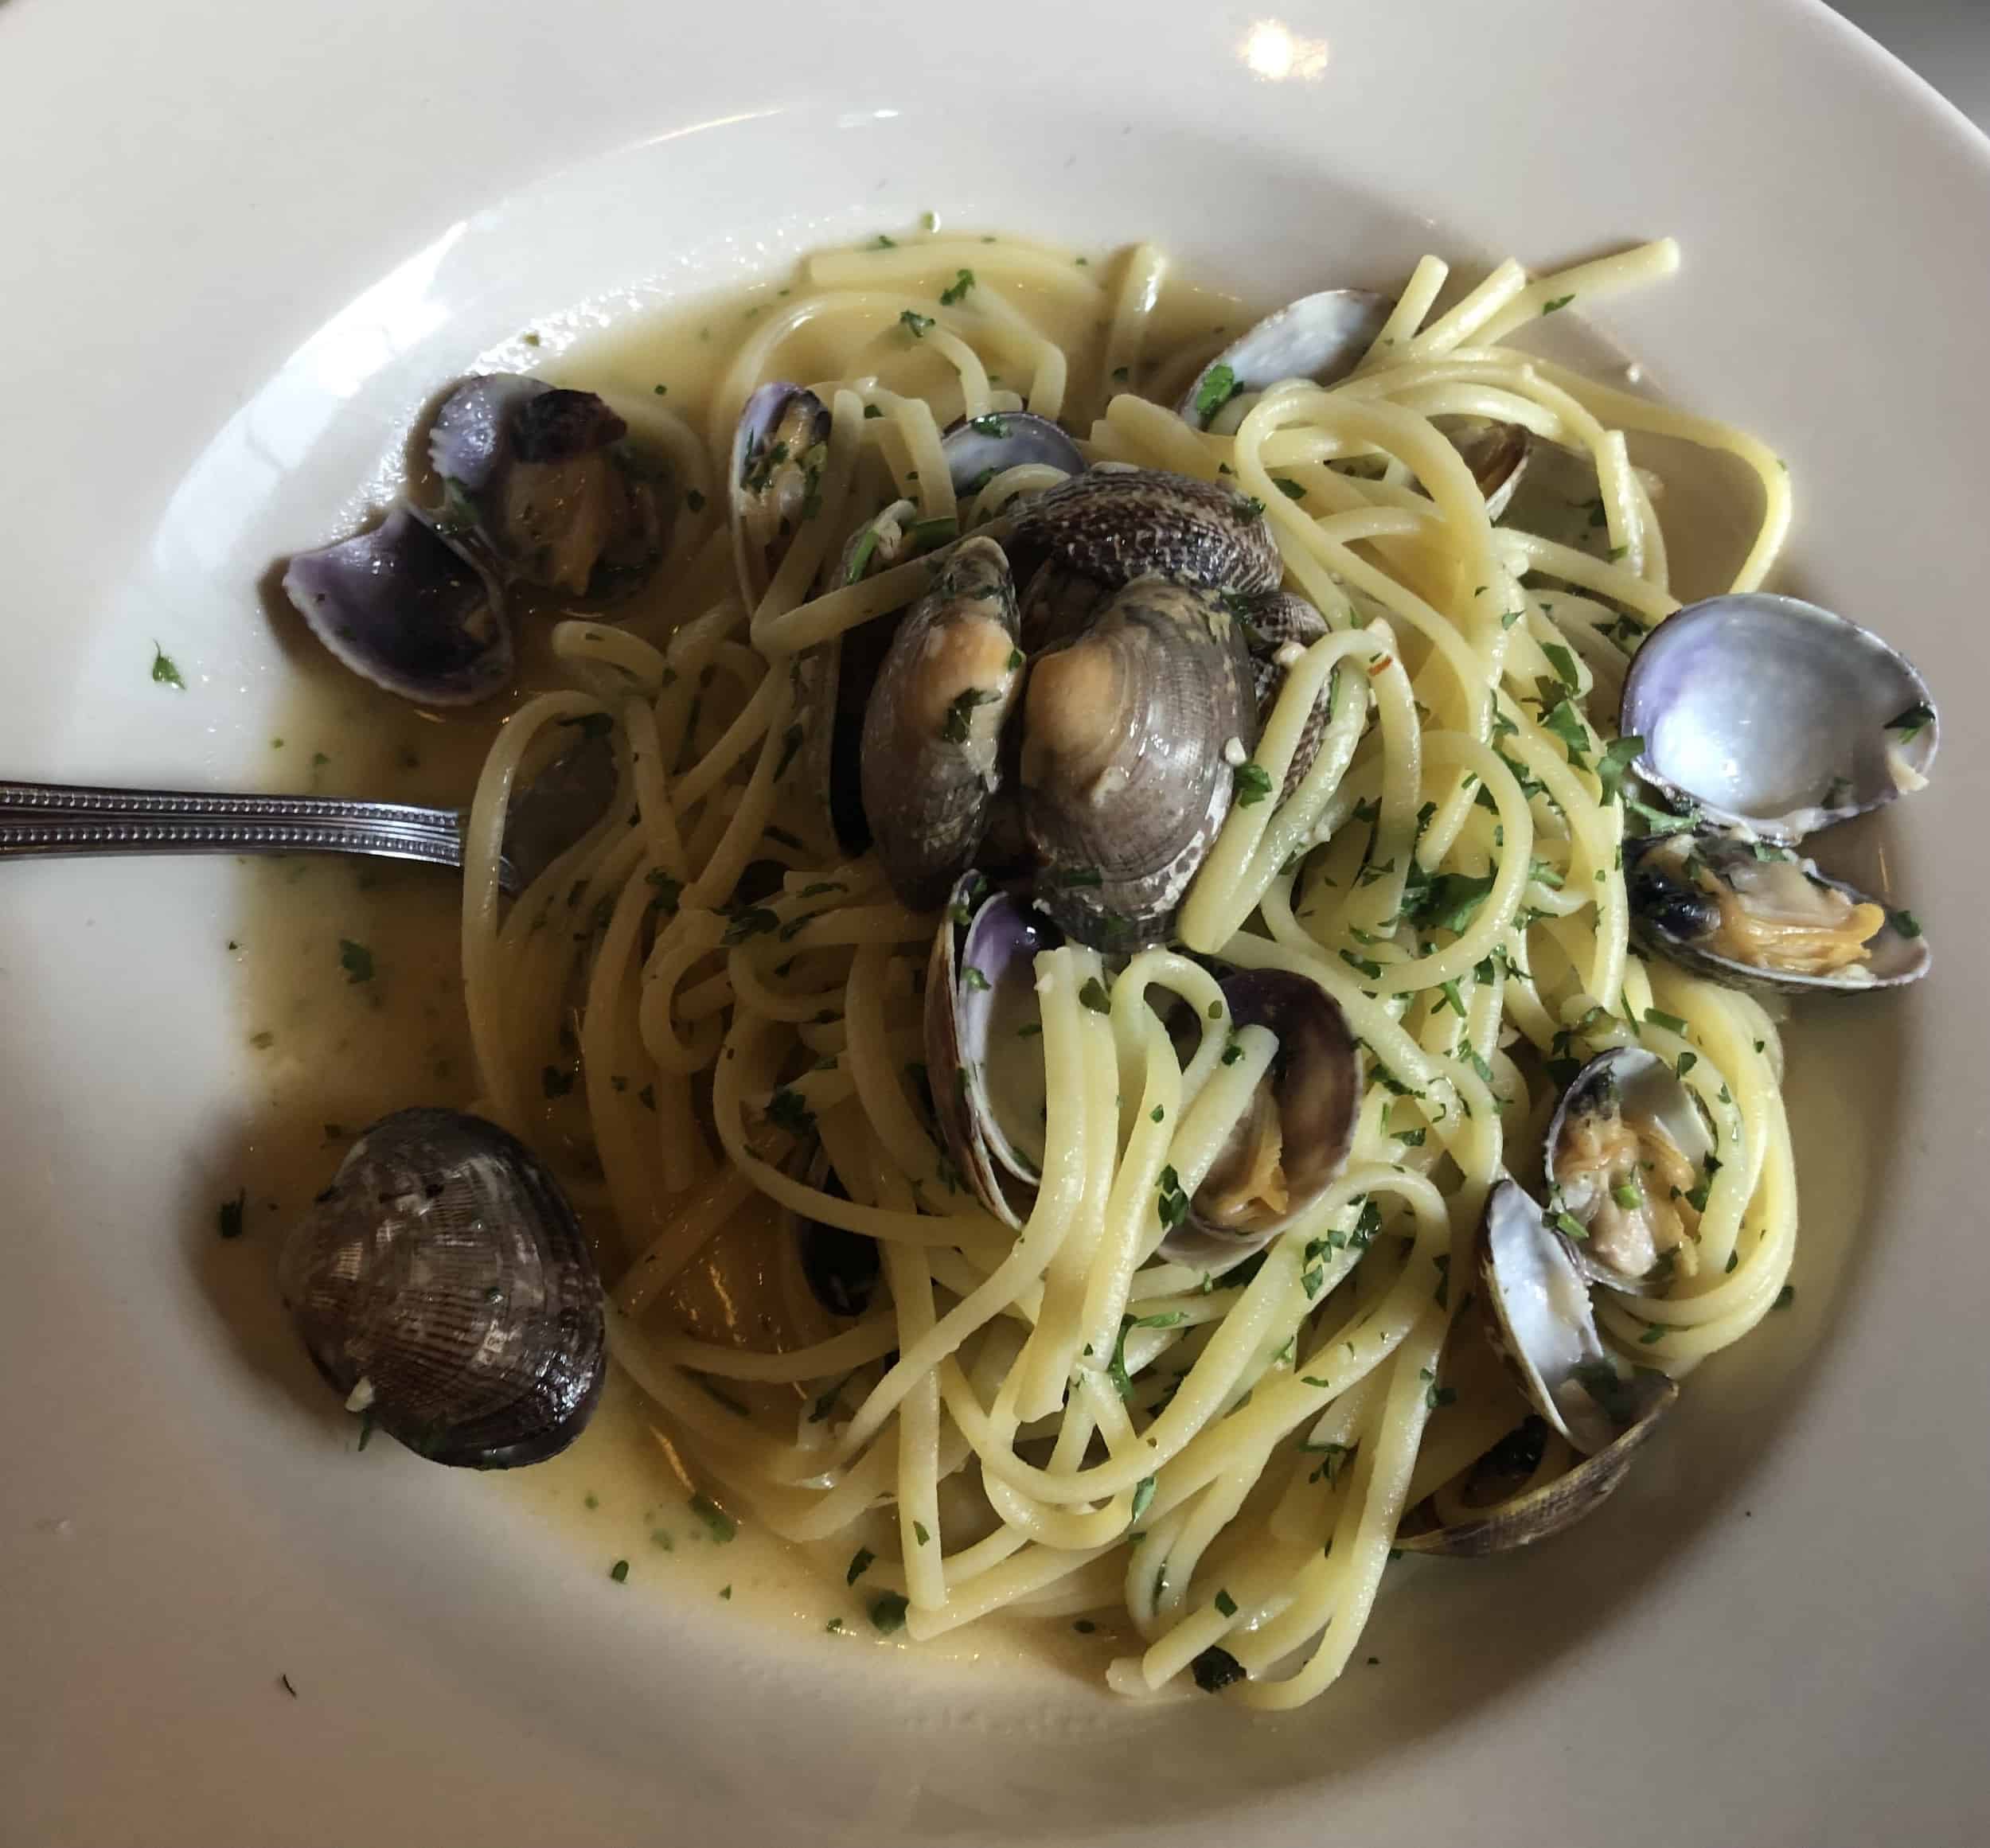 Linguine con vongole at Francesca's on Chestnut in the Chicago Gold Coast